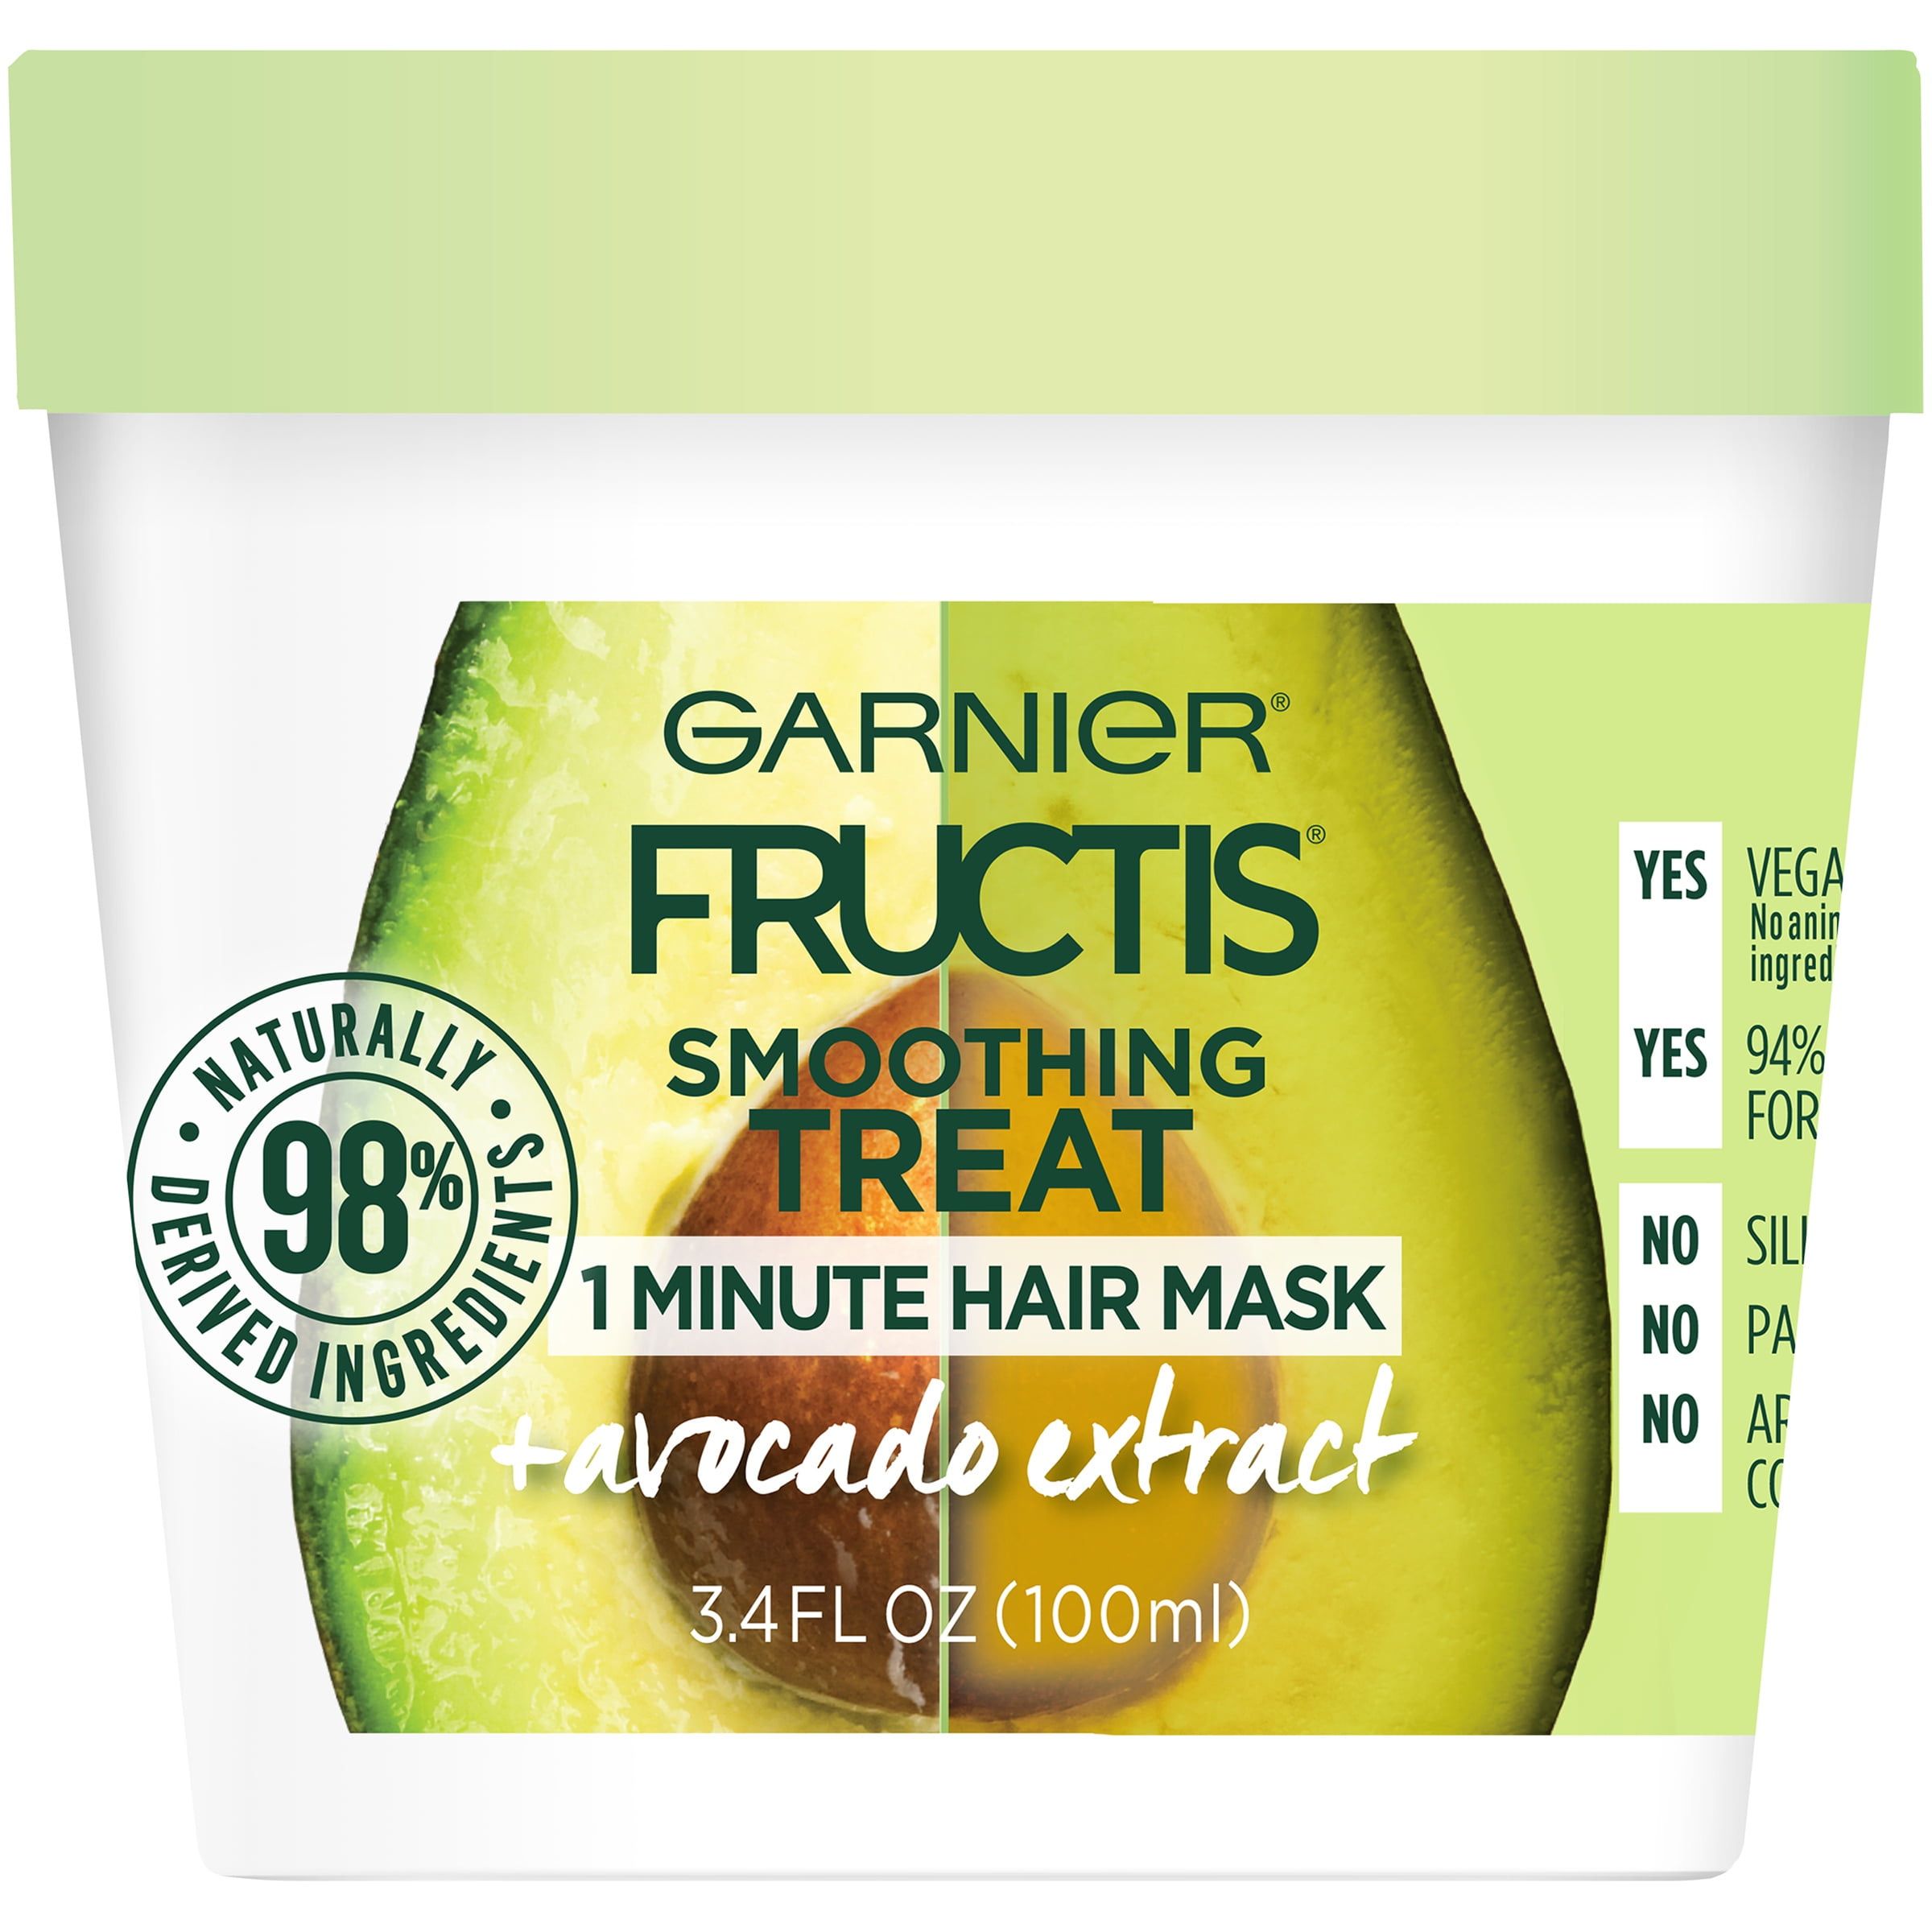 Fructis Smoothing Treat 1 Hair Mask with Extract, 3.4 - Walmart.com